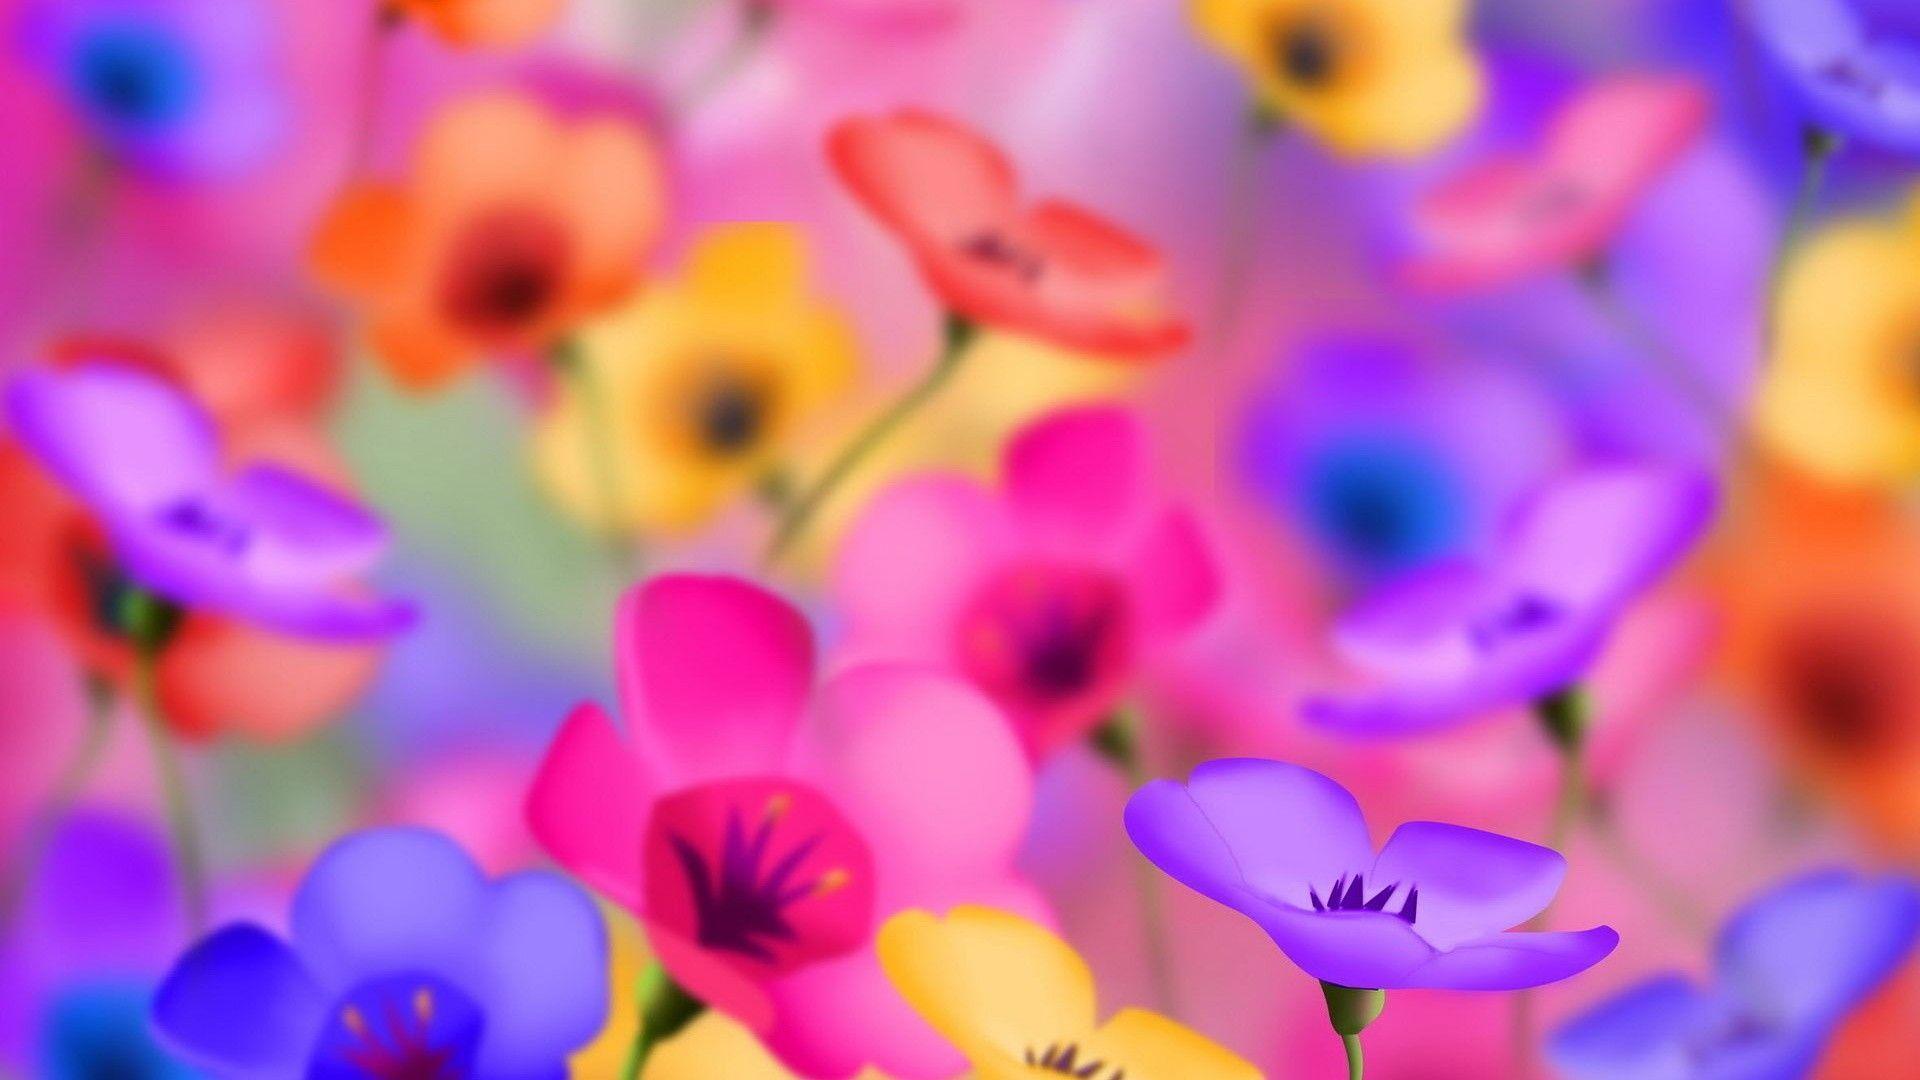 Pretty Free Wallpaper for Android Phone 1920x1080PX Free